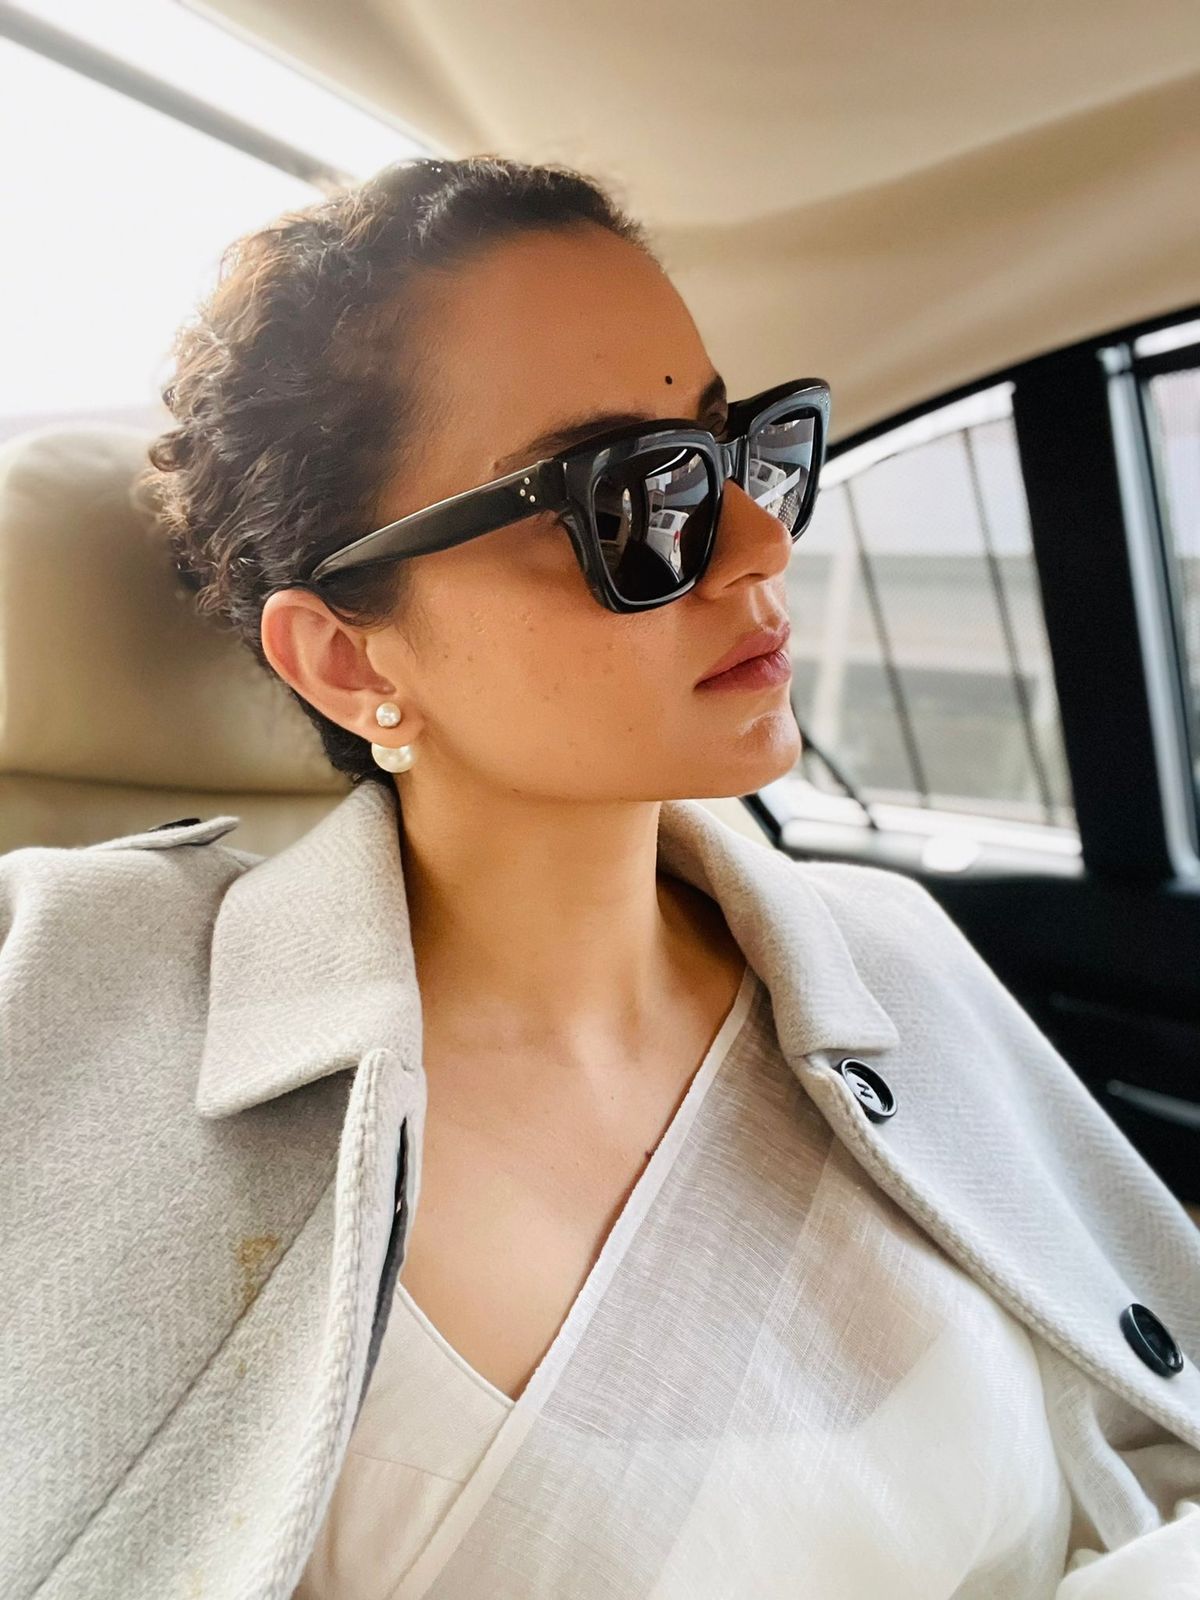 Kangana Ranaut Writes 'If You Are Anti India You Will Find Support, Work, Appreciation' After Recording Statement In Sedition Case